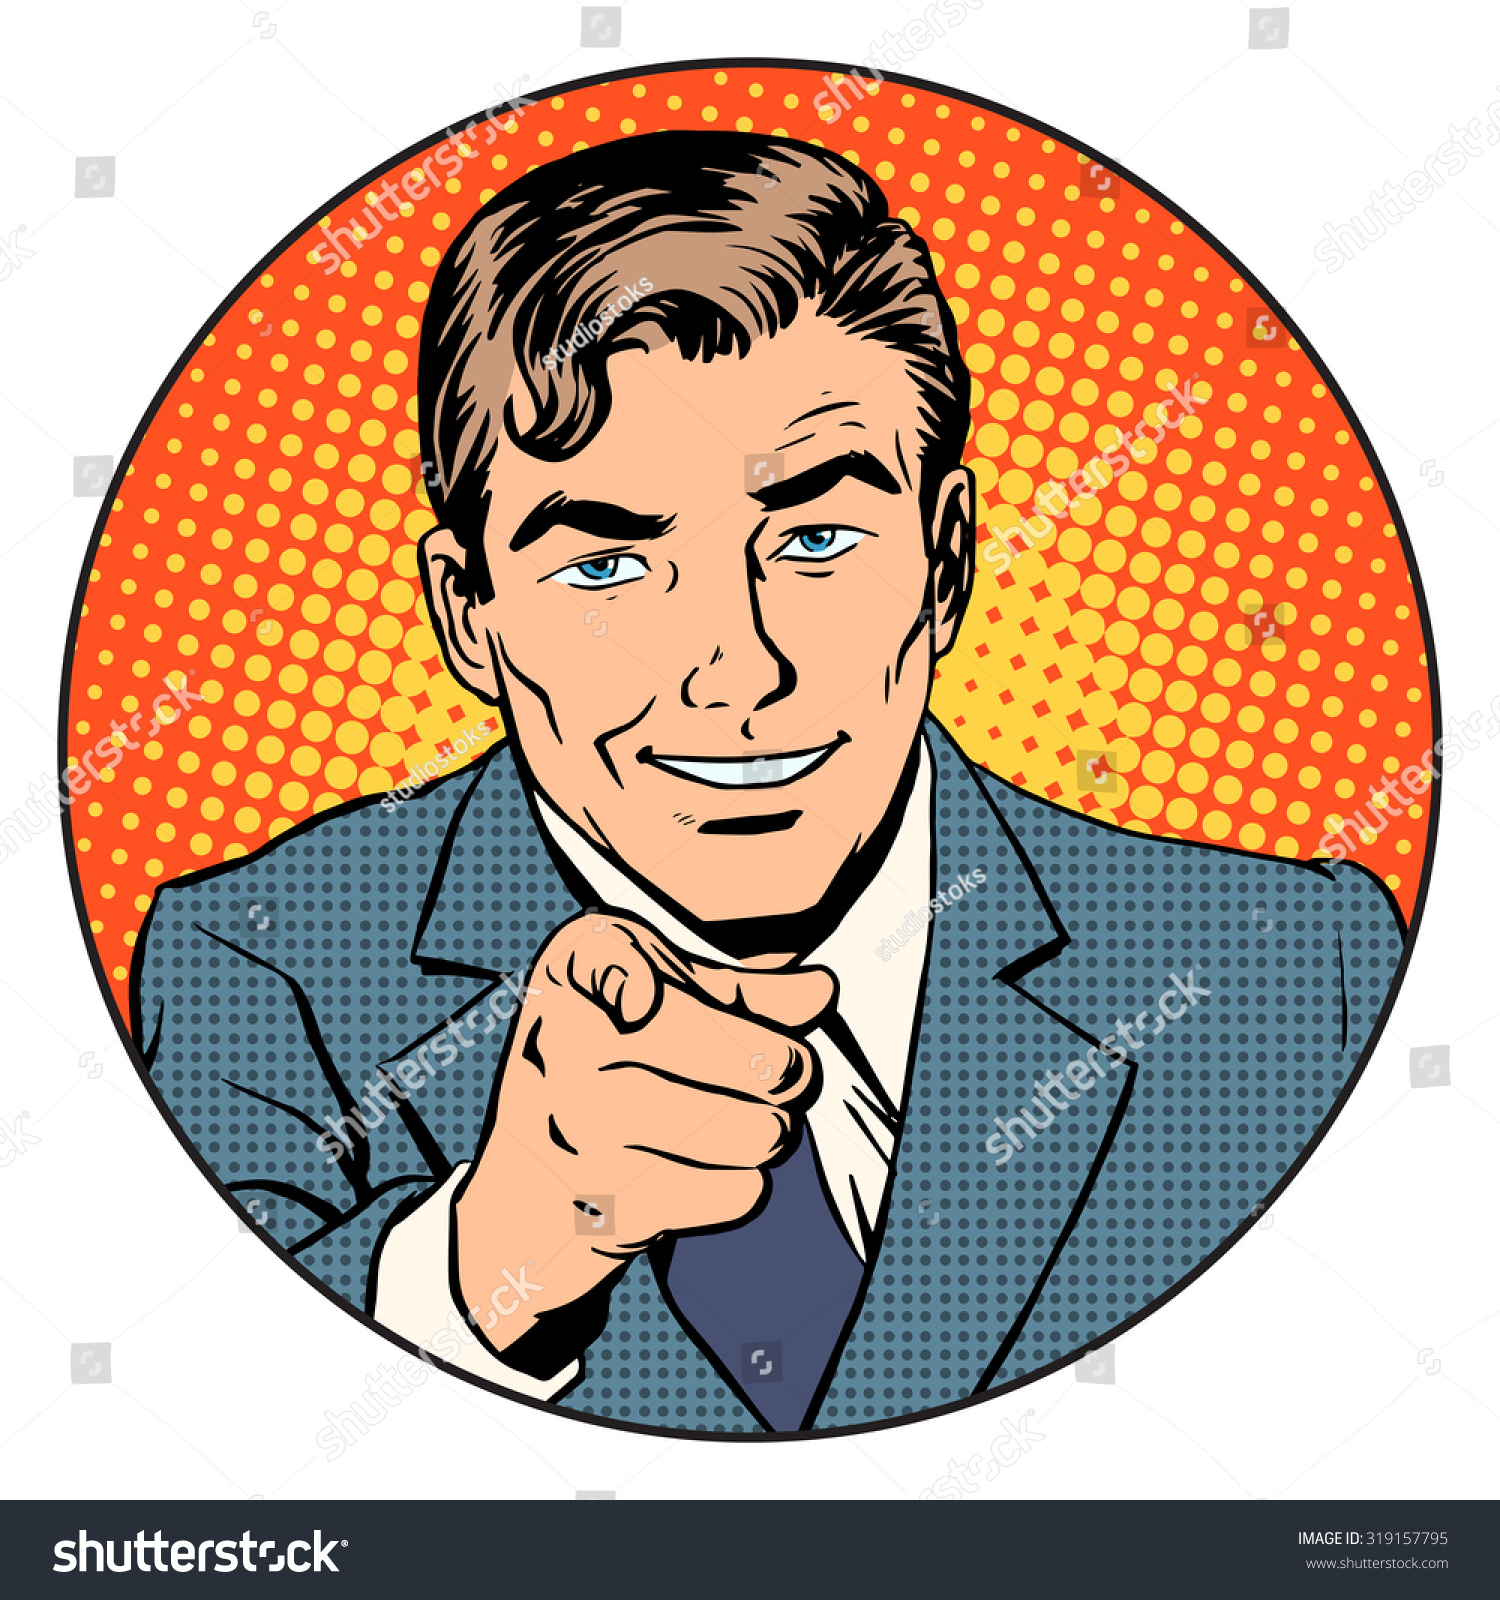 man pointing clipart - photo #50